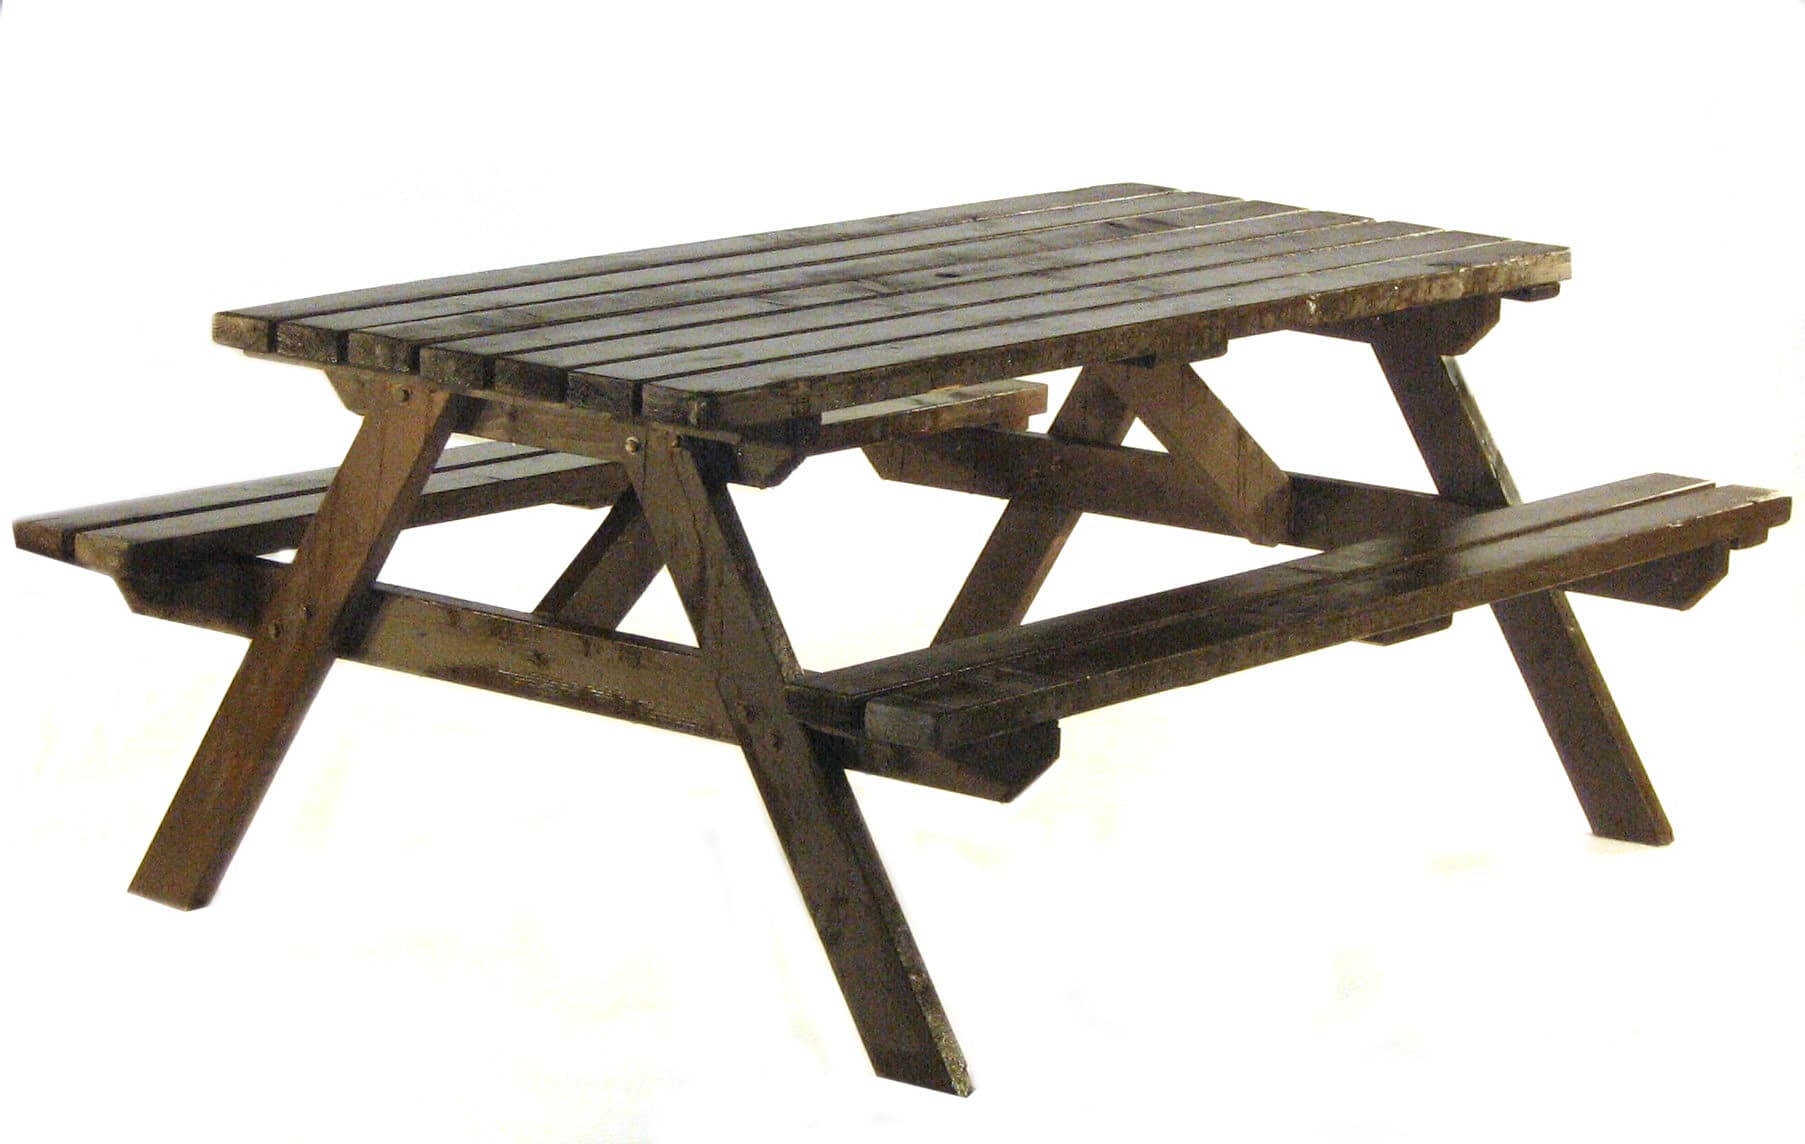 Wooden Picnic Bench Hire - Weddings, Events, Exhibitions - BE Event Hire